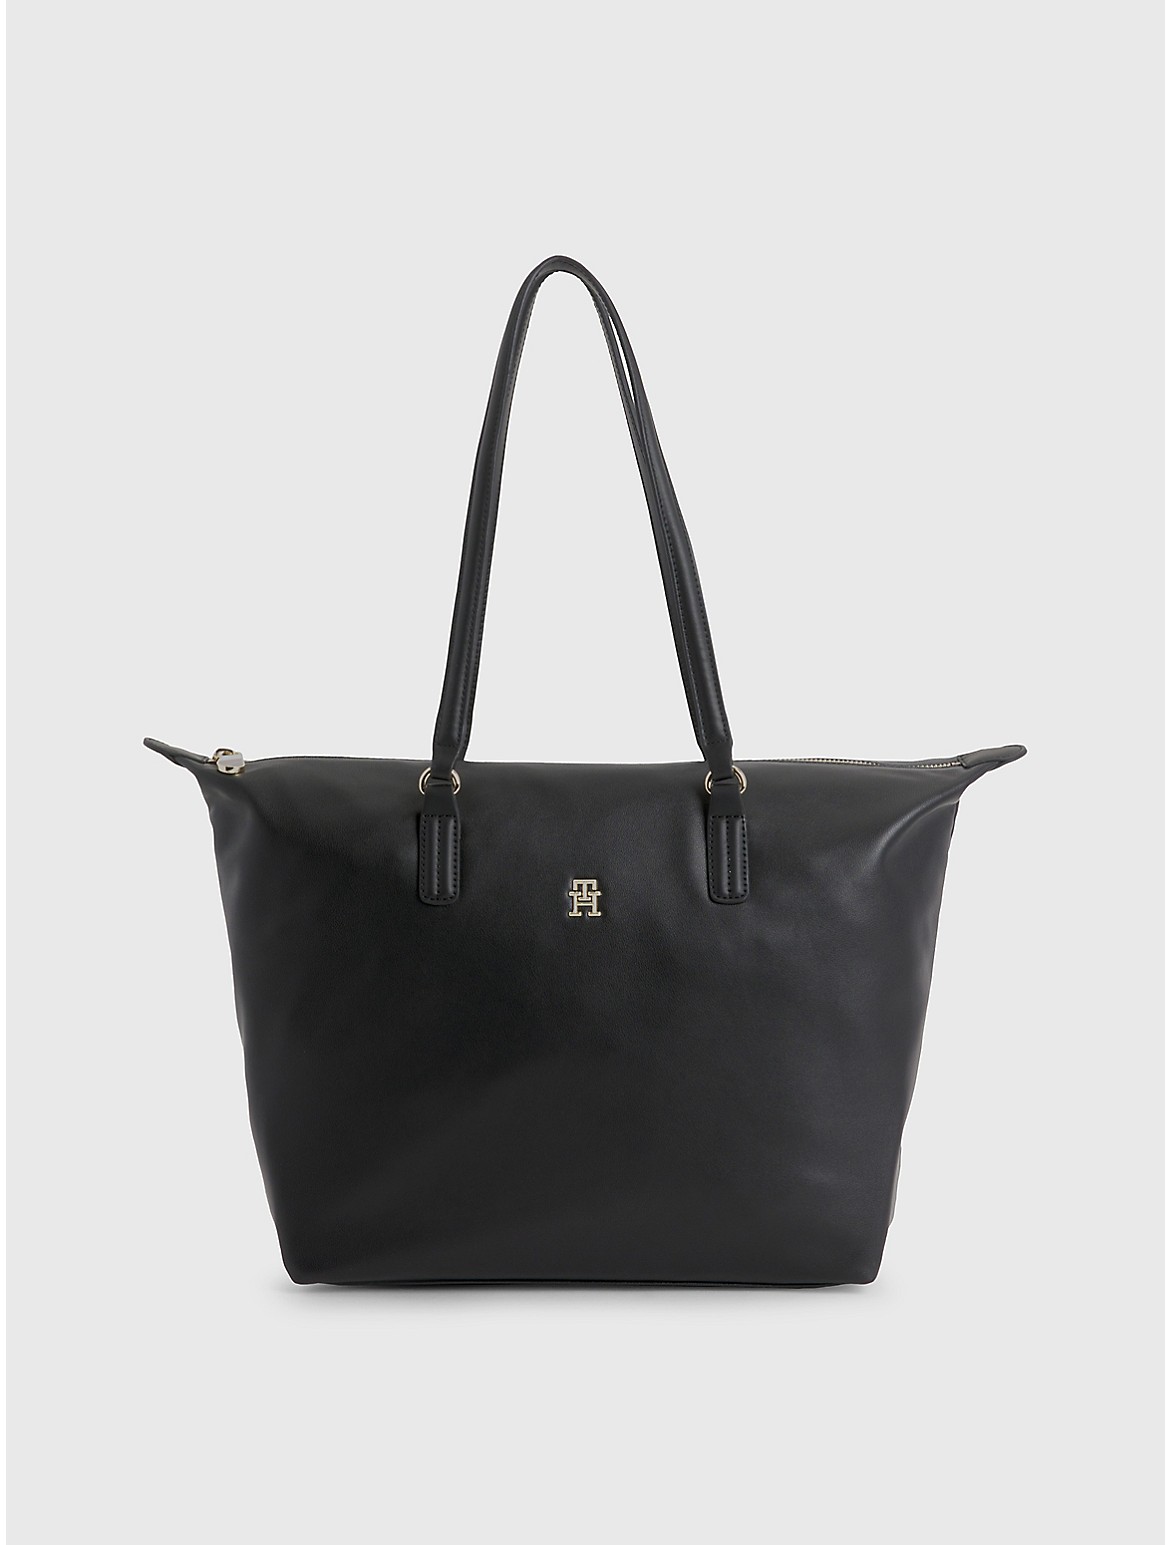 Tommy Hilfiger Women's TH Logo Tote